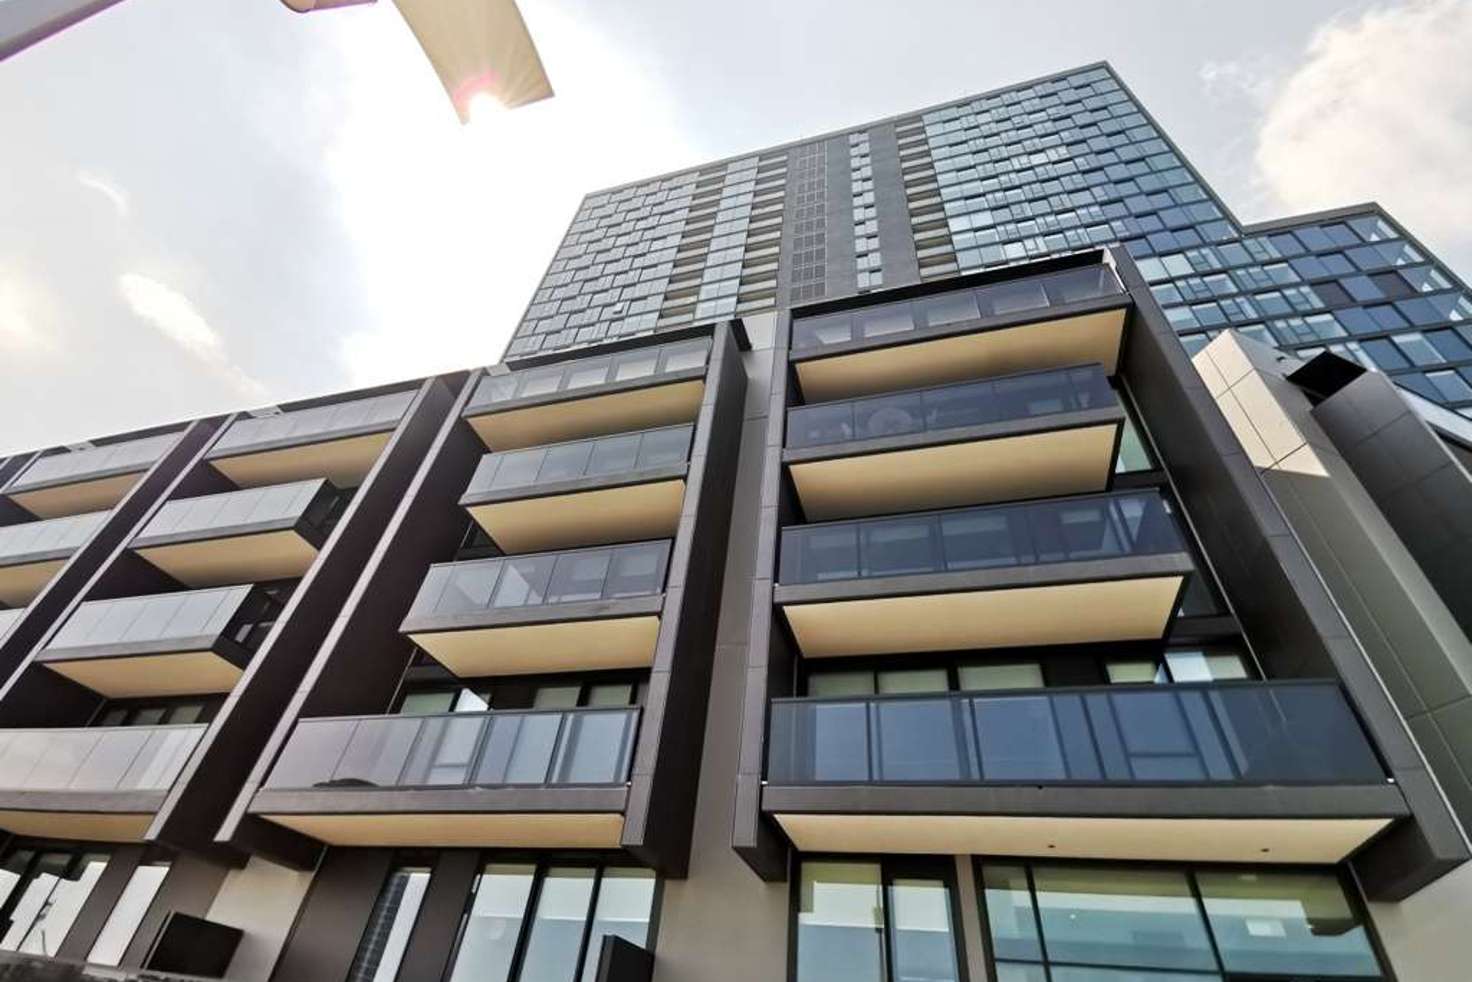 Main view of Homely apartment listing, 1205/915 COLLINS STREET, Docklands VIC 3008